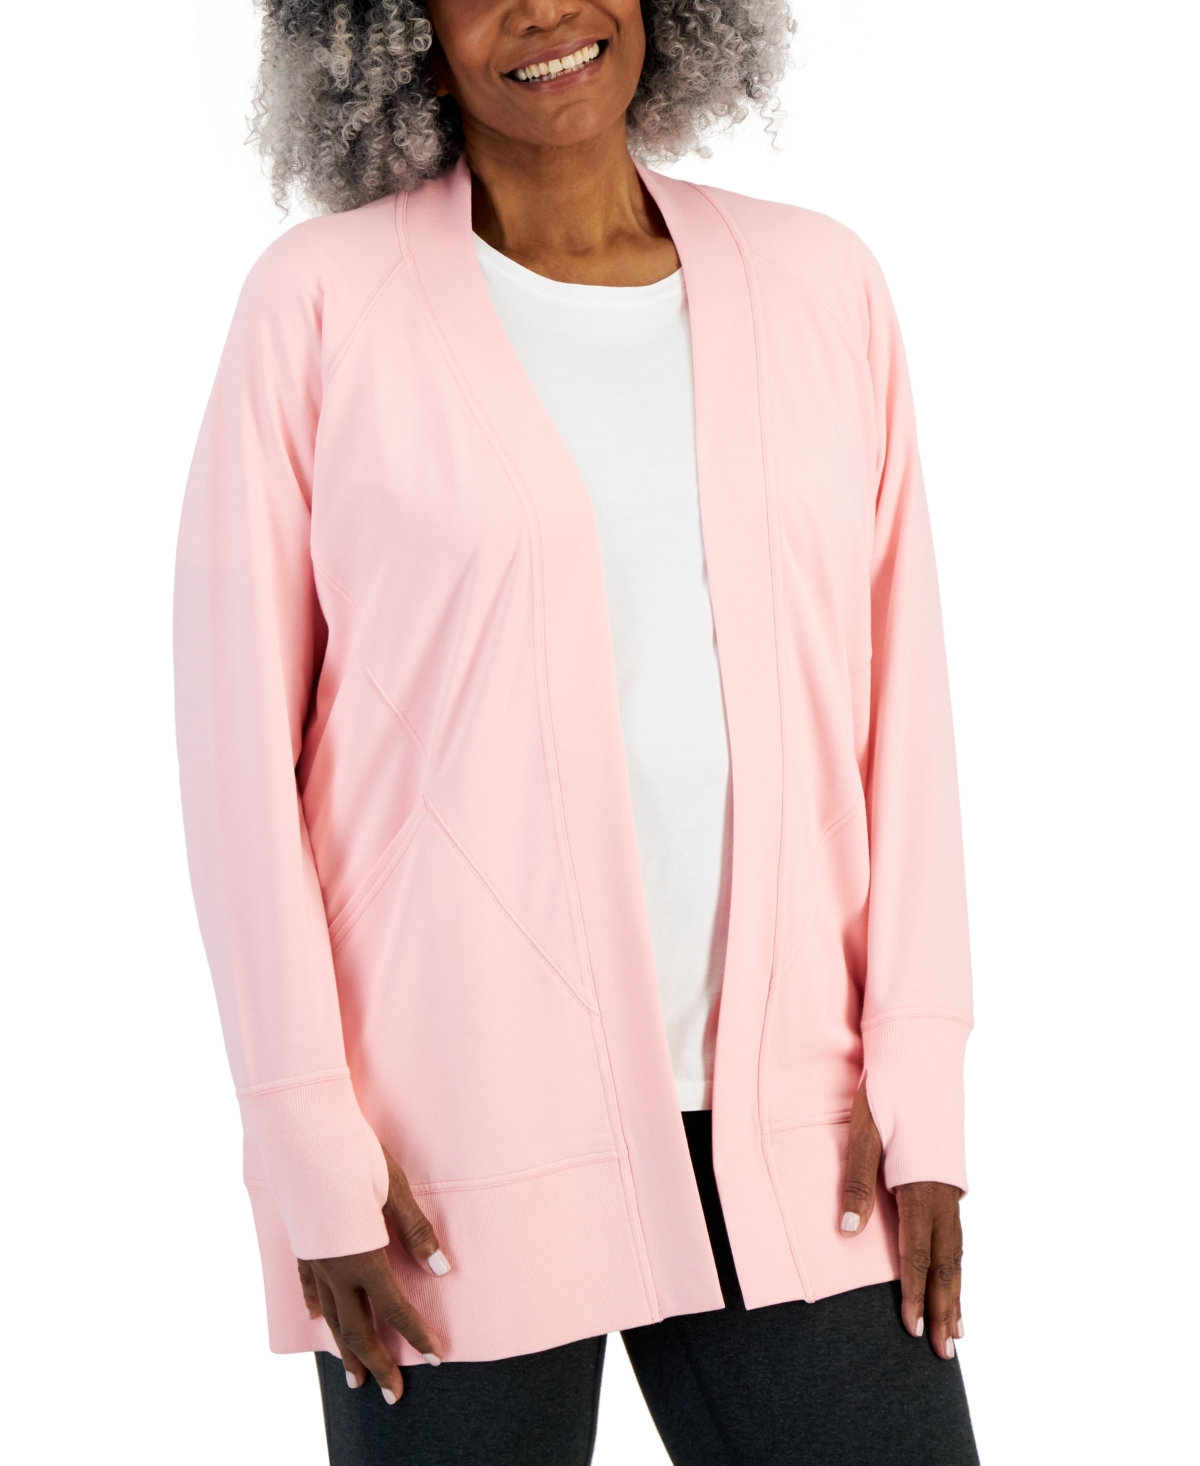 Plus Size Comfort Thumbhole Cardigan Sweater, Created for Macy's - Pink Icing